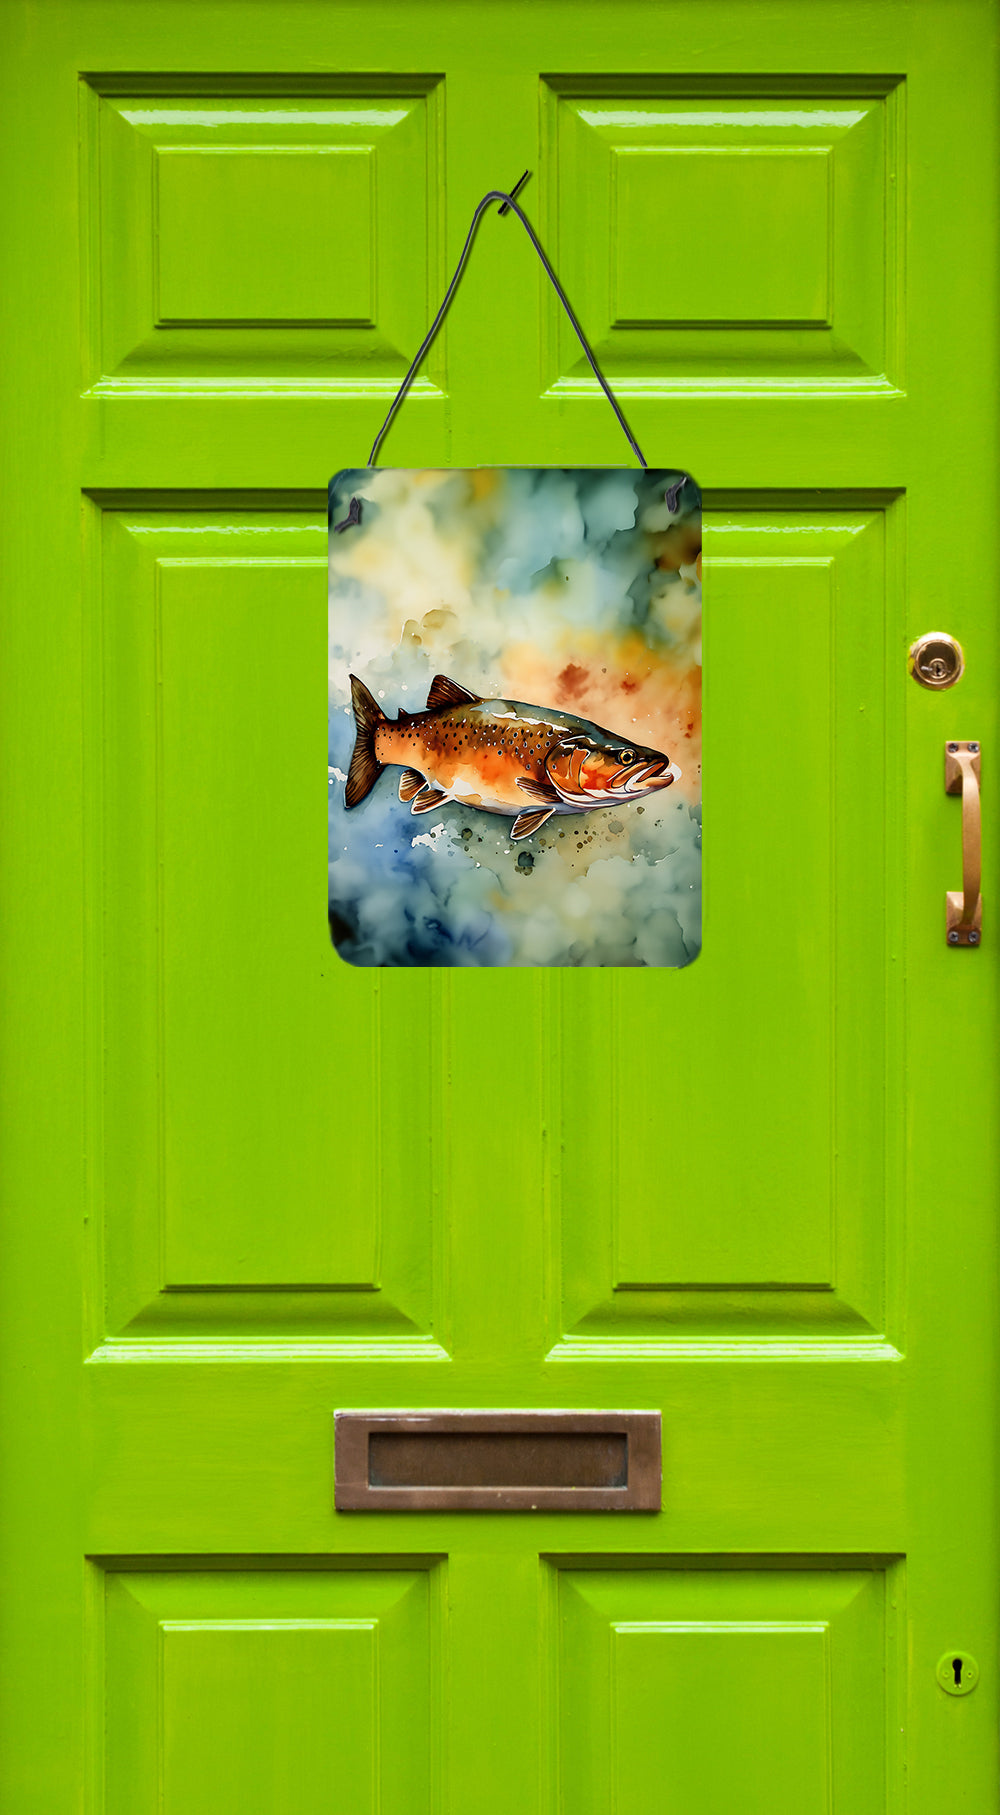 Buy this Brown Trout Wall or Door Hanging Prints